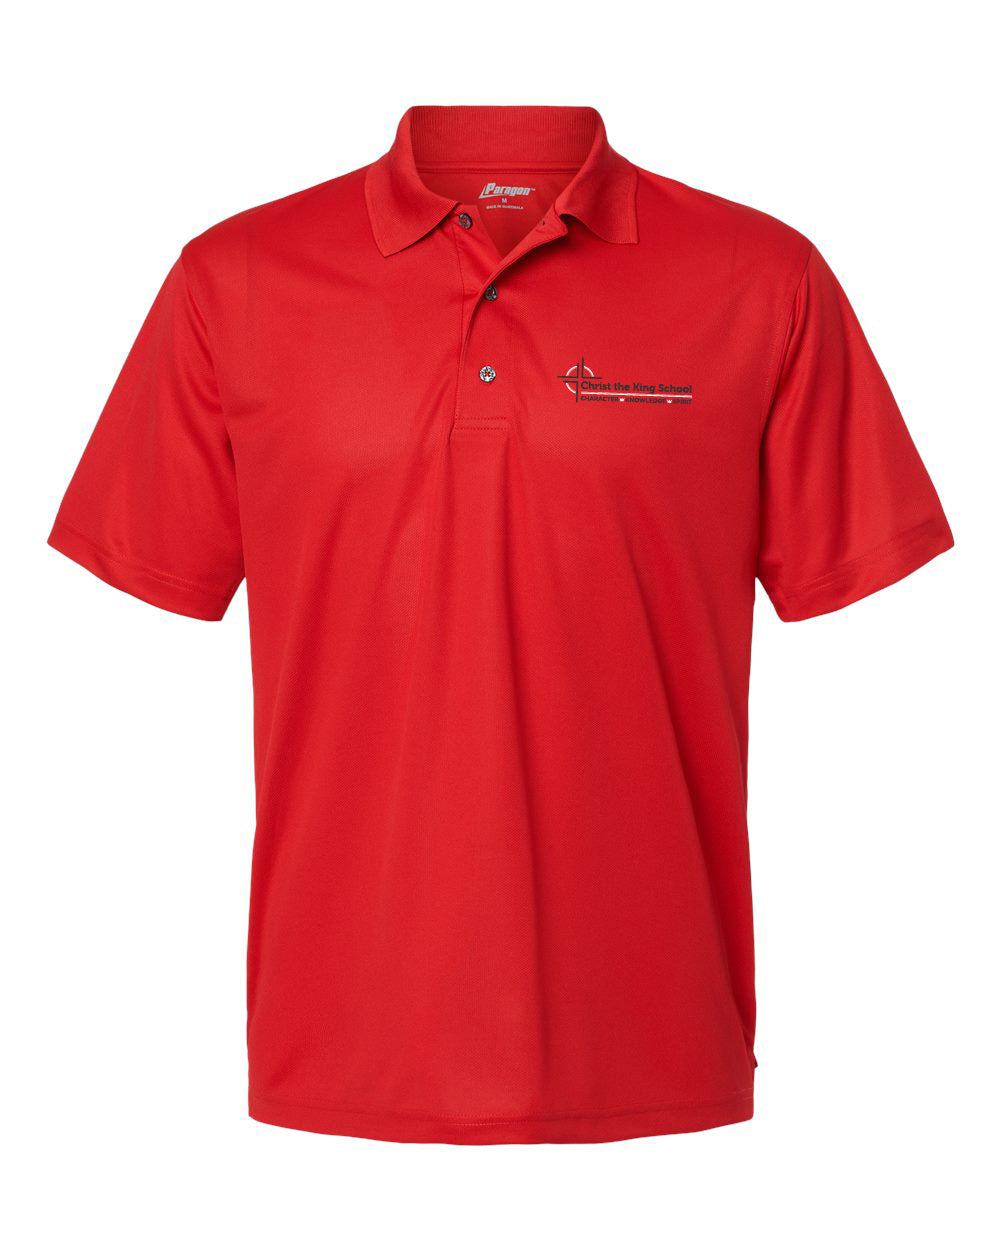 Pre-Order YOUTH - Dry Fit Short Sleeve Polo - Red